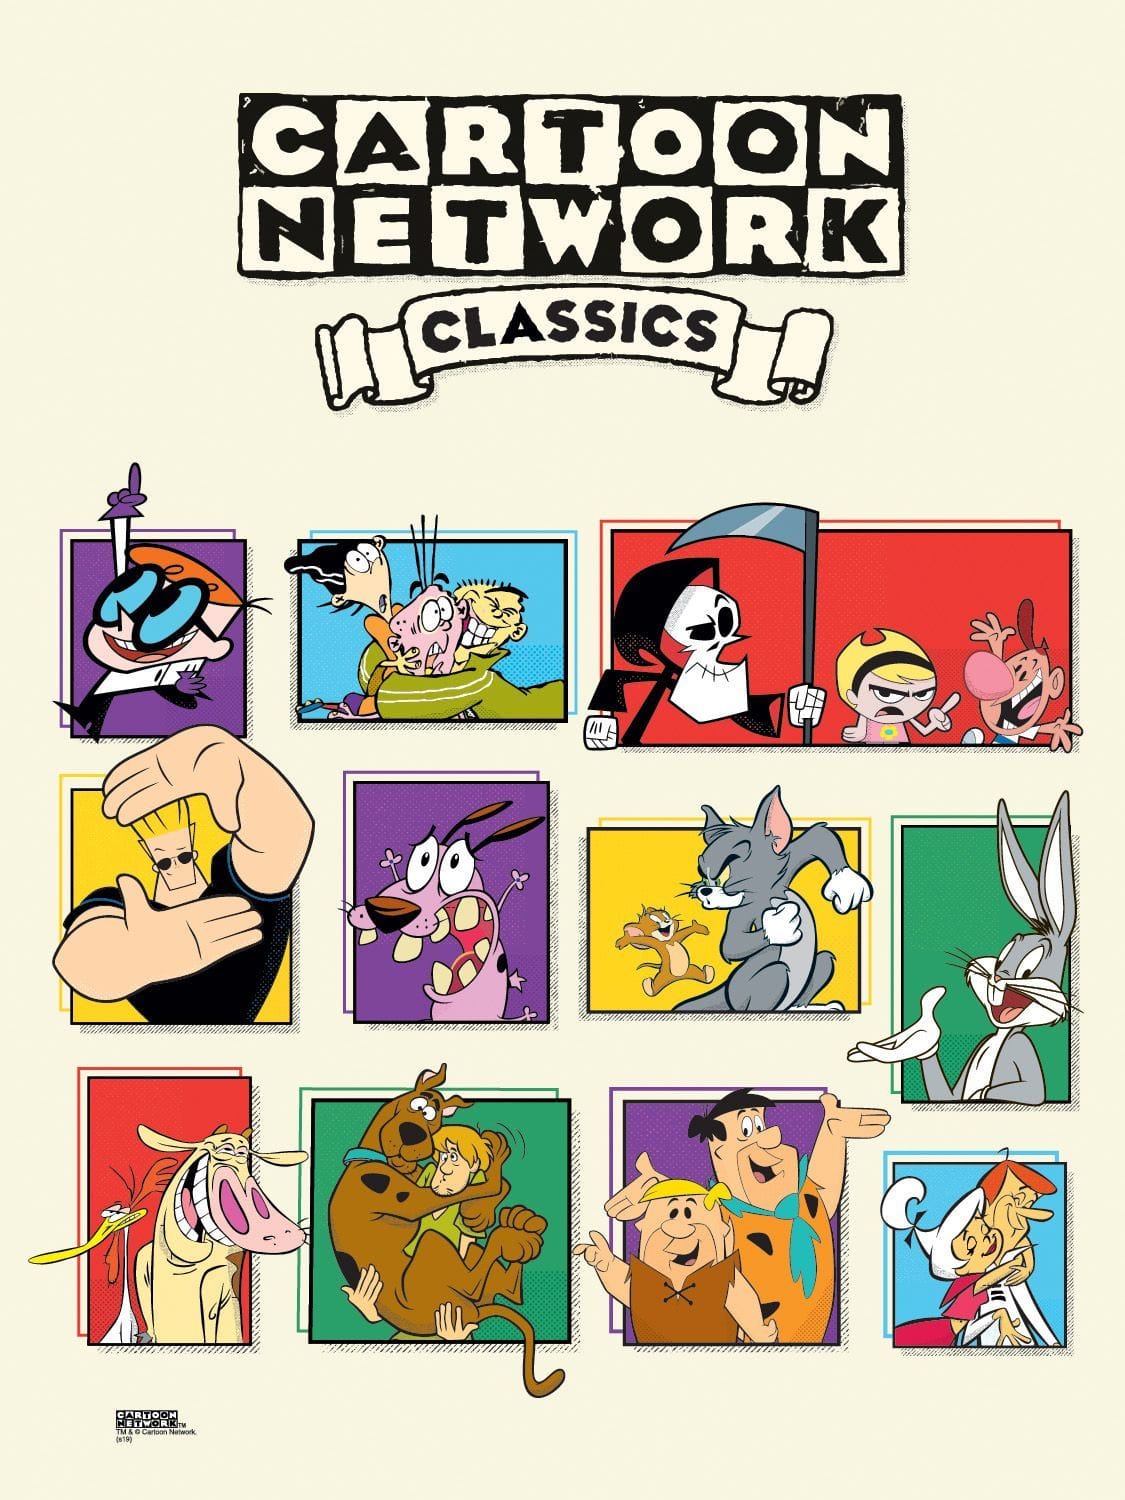 An image of Cartoon Network characters